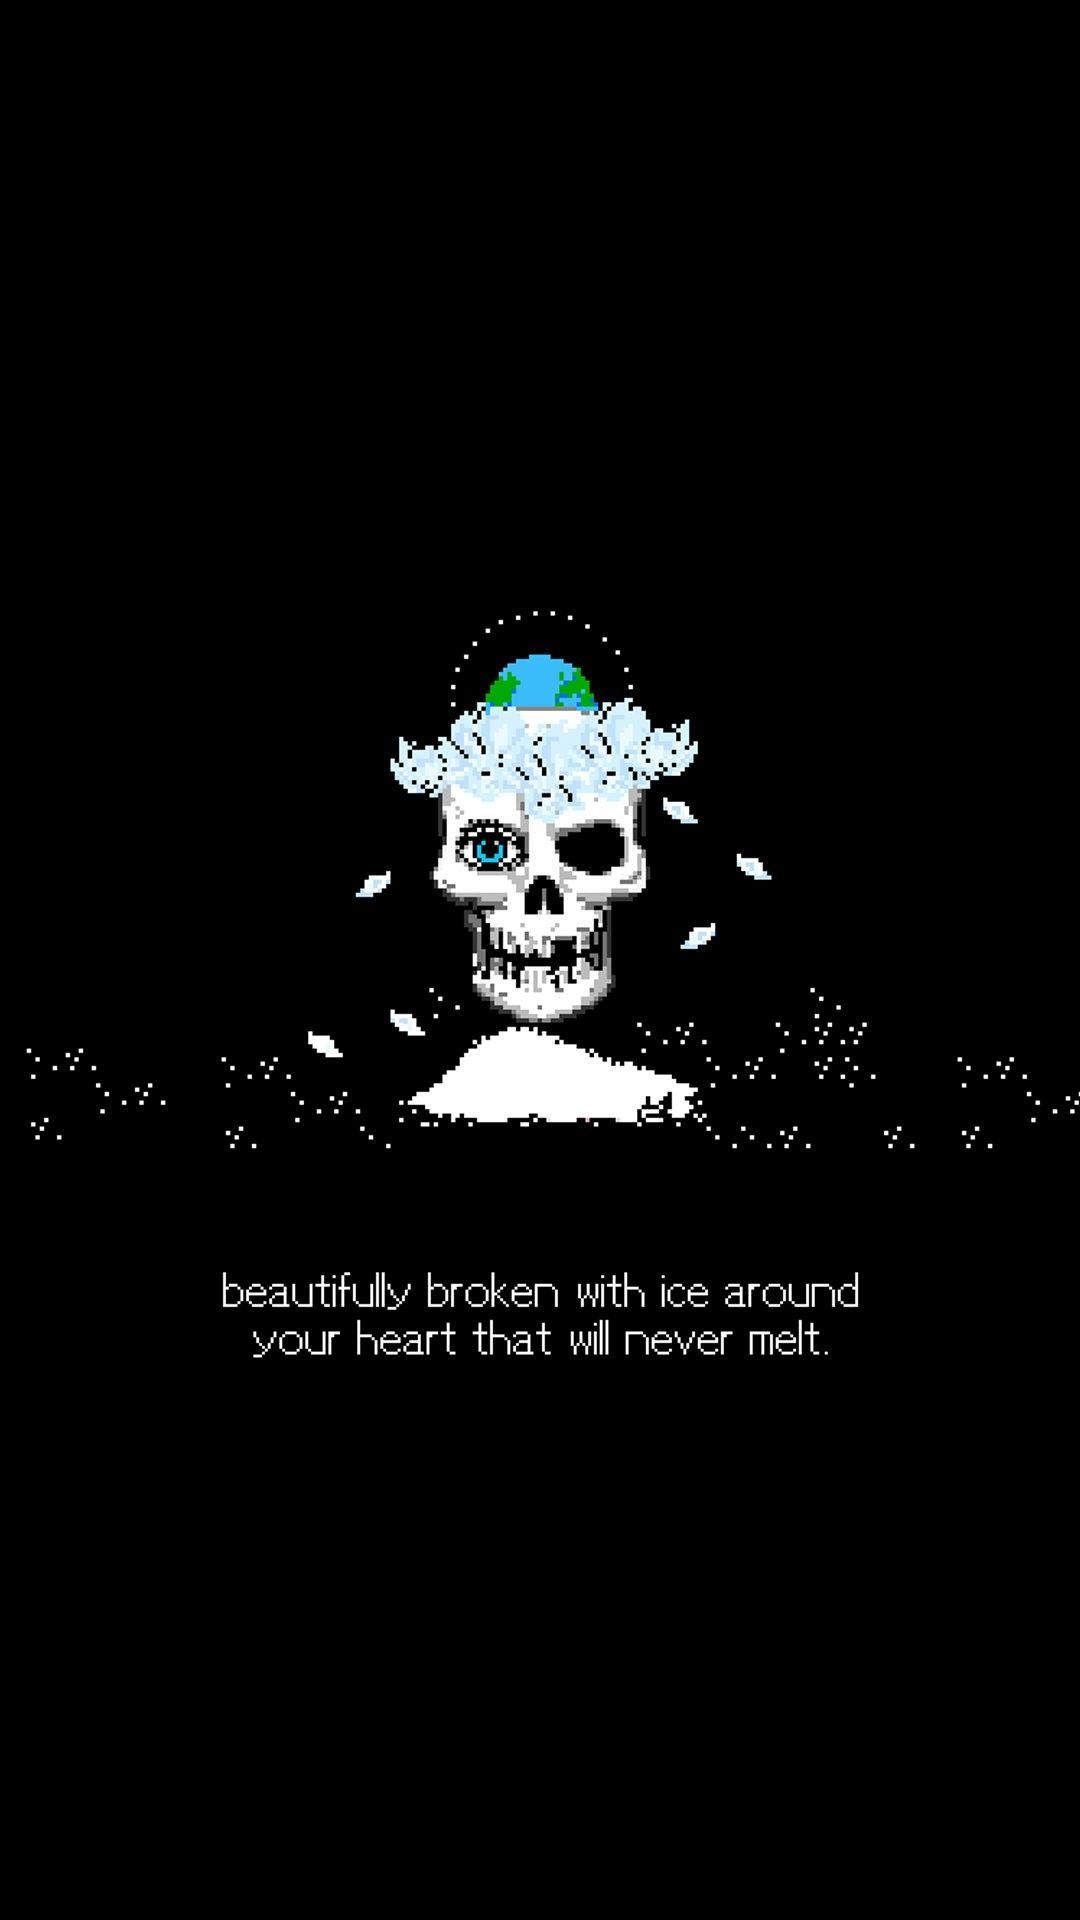 A skull with a green hat and snow on its head. - Gothic